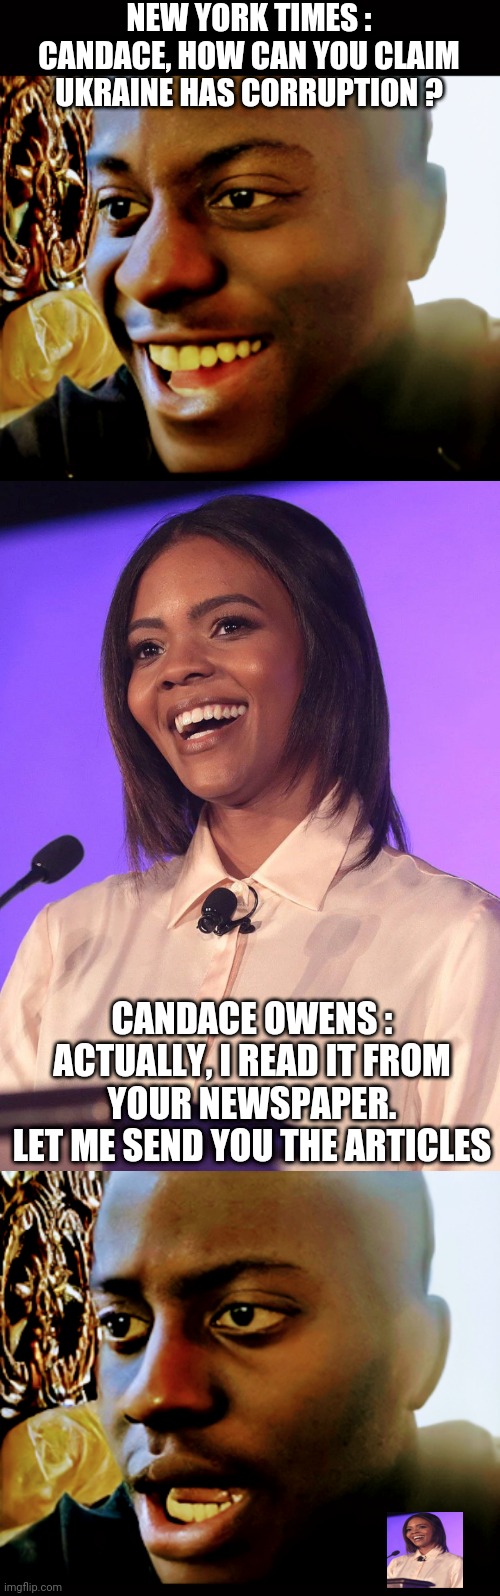 Oopsie... | NEW YORK TIMES :
CANDACE, HOW CAN YOU CLAIM UKRAINE HAS CORRUPTION ? CANDACE OWENS :
ACTUALLY, I READ IT FROM YOUR NEWSPAPER.
LET ME SEND YOU THE ARTICLES | image tagged in ny times,candace owens,ukraine,liberals,democrats,media | made w/ Imgflip meme maker